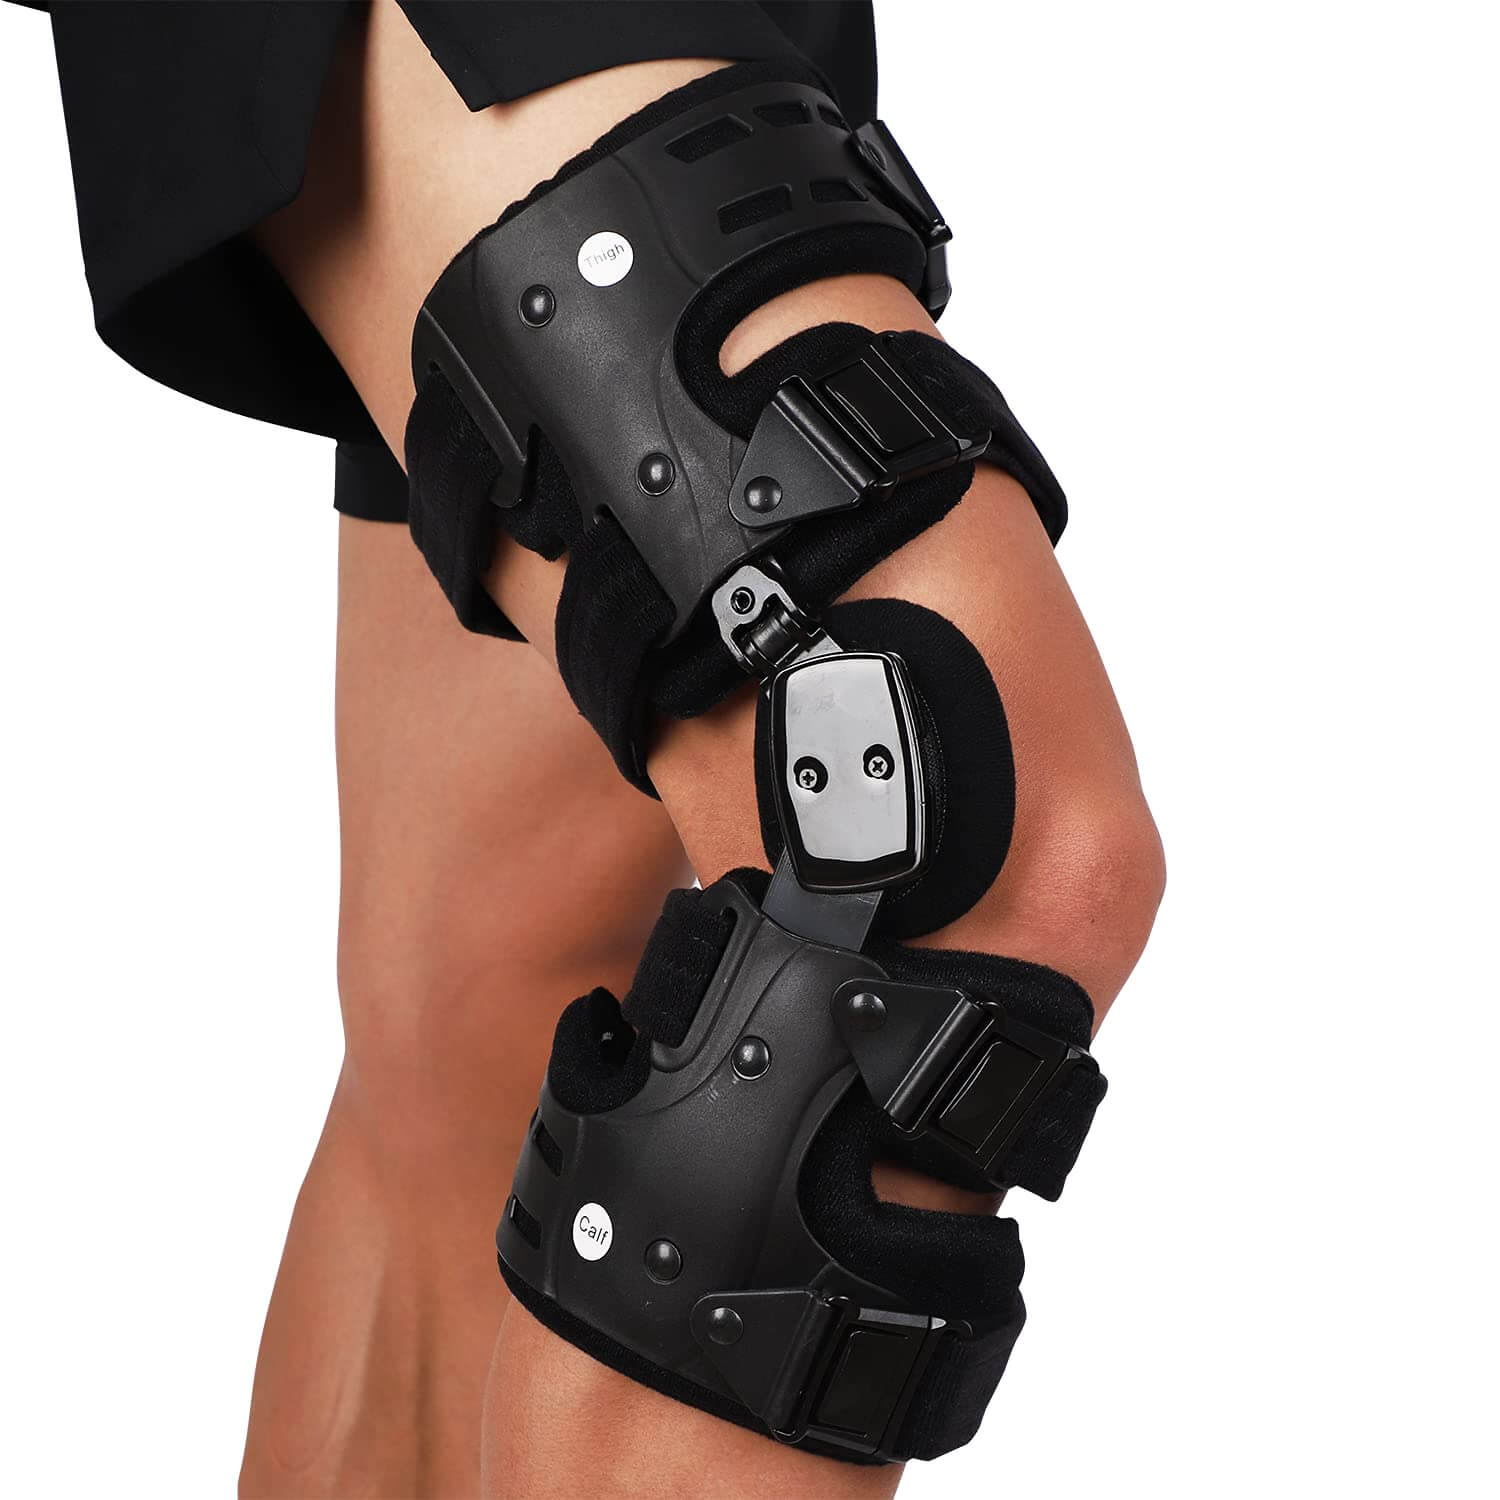 he Ascender Knee Brace, a top-of-the-line knee brace designed to provide optimal support and stability